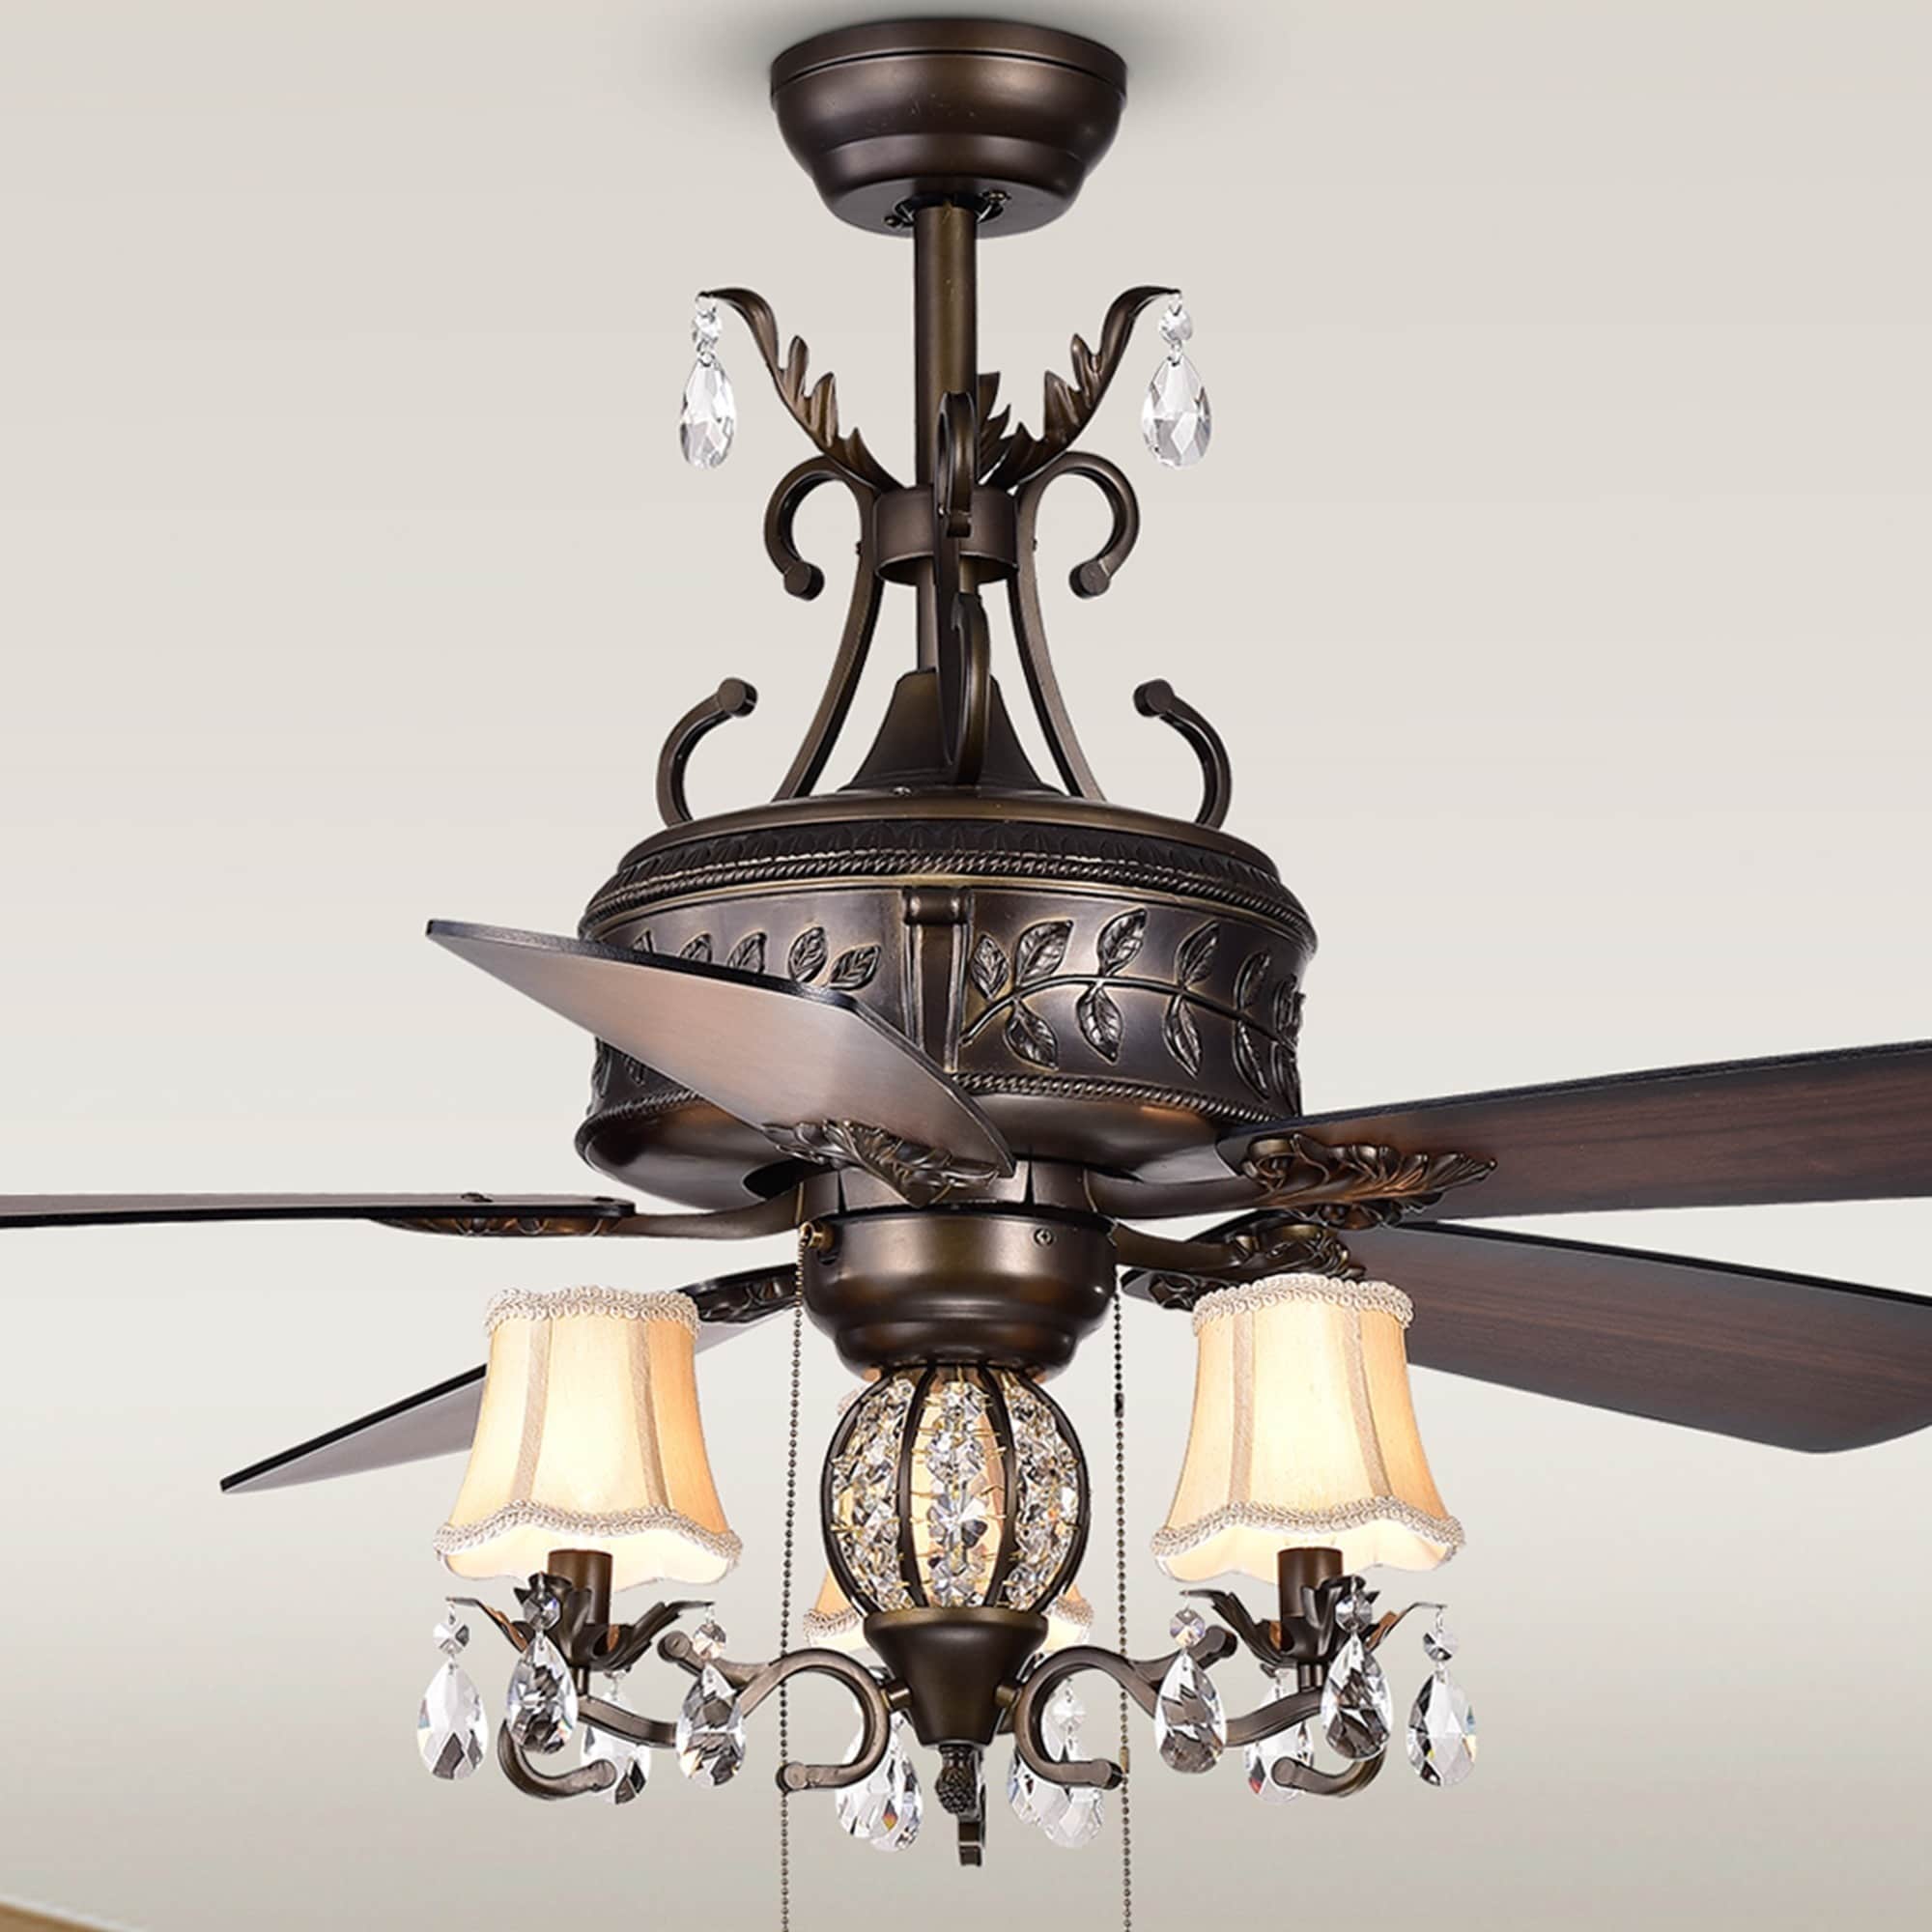 Country Style Ceiling Fans | vlr.eng.br